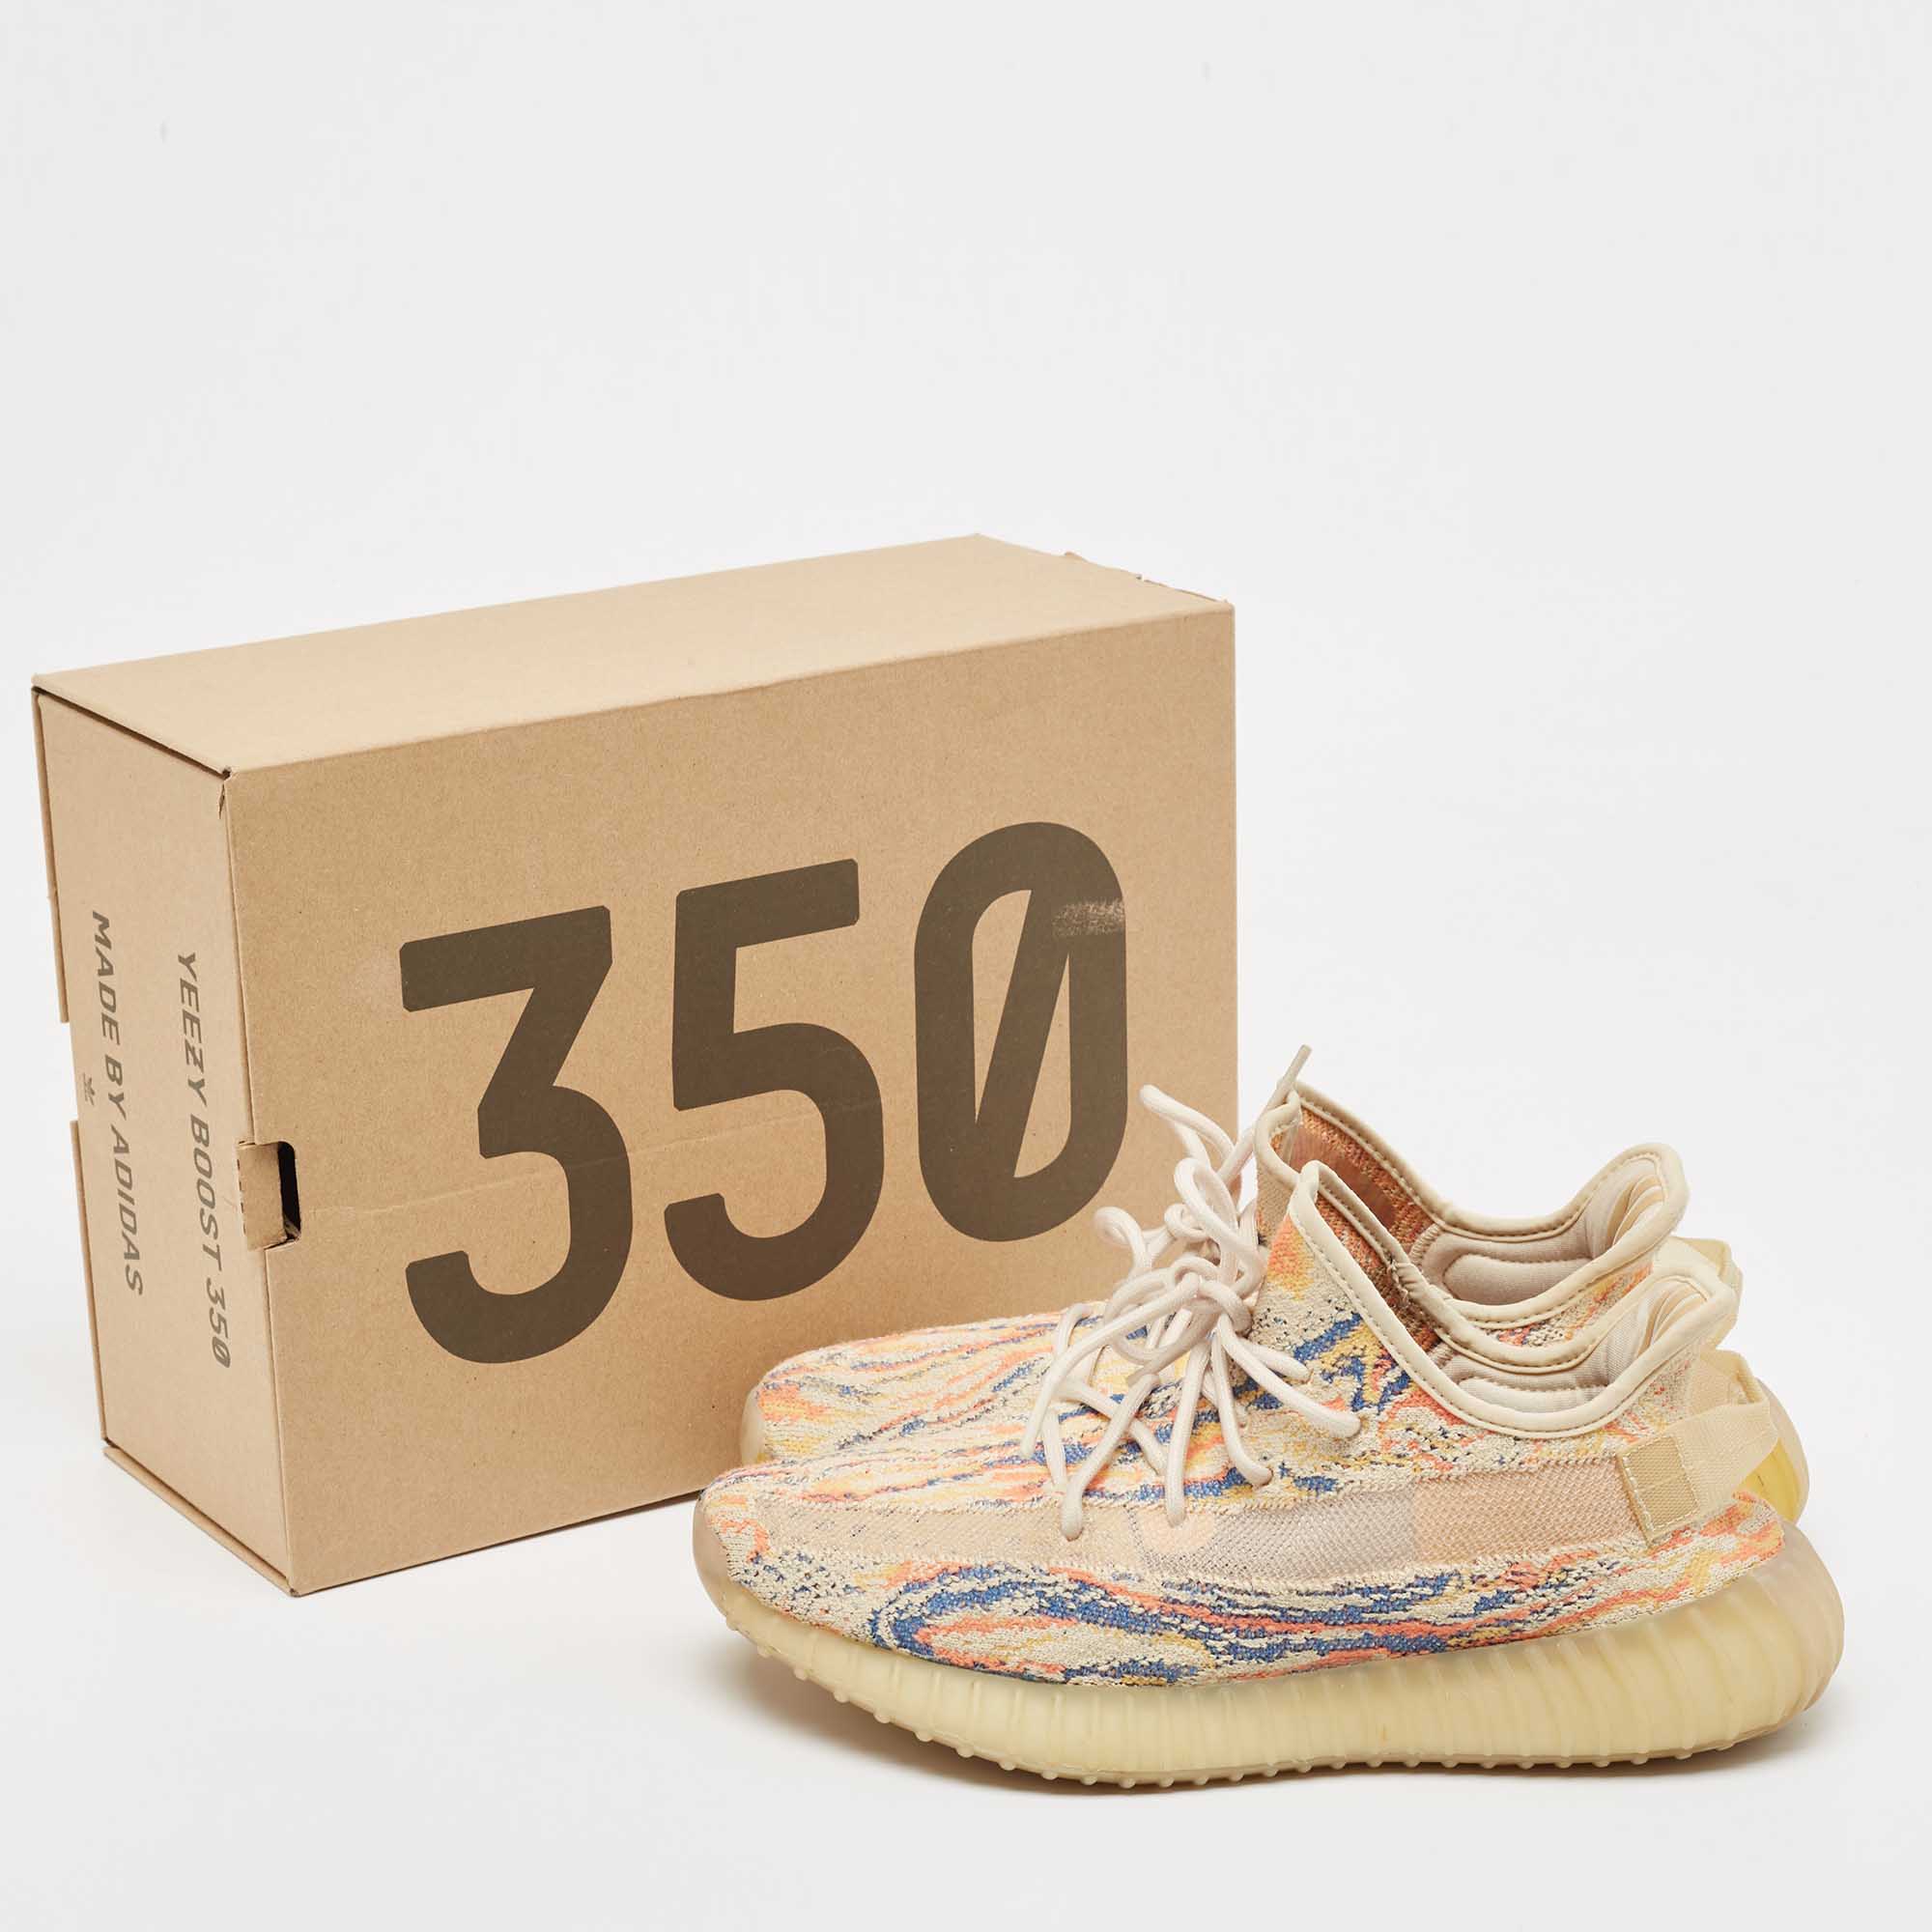 Yeezy X Adidas Multicolor Knit Fabric Boost 350 V2 Sneakers Size 42